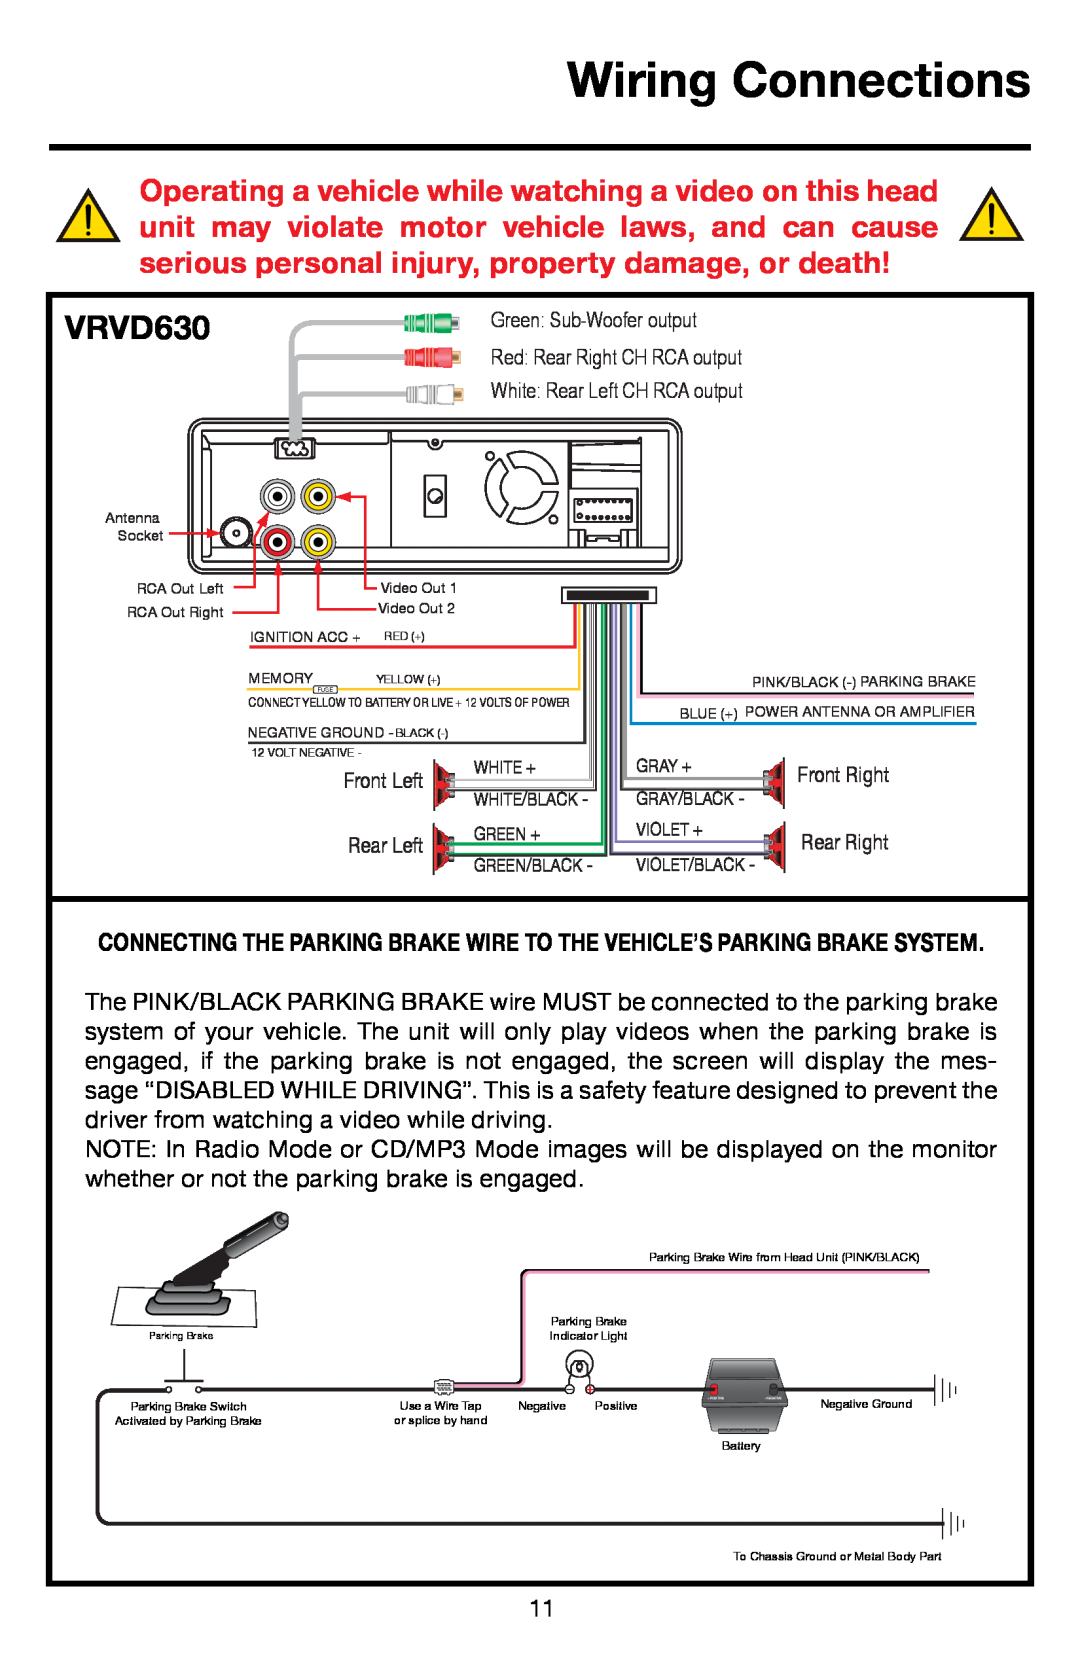 Roadmaster VRVD630 manual Wiring Connections 